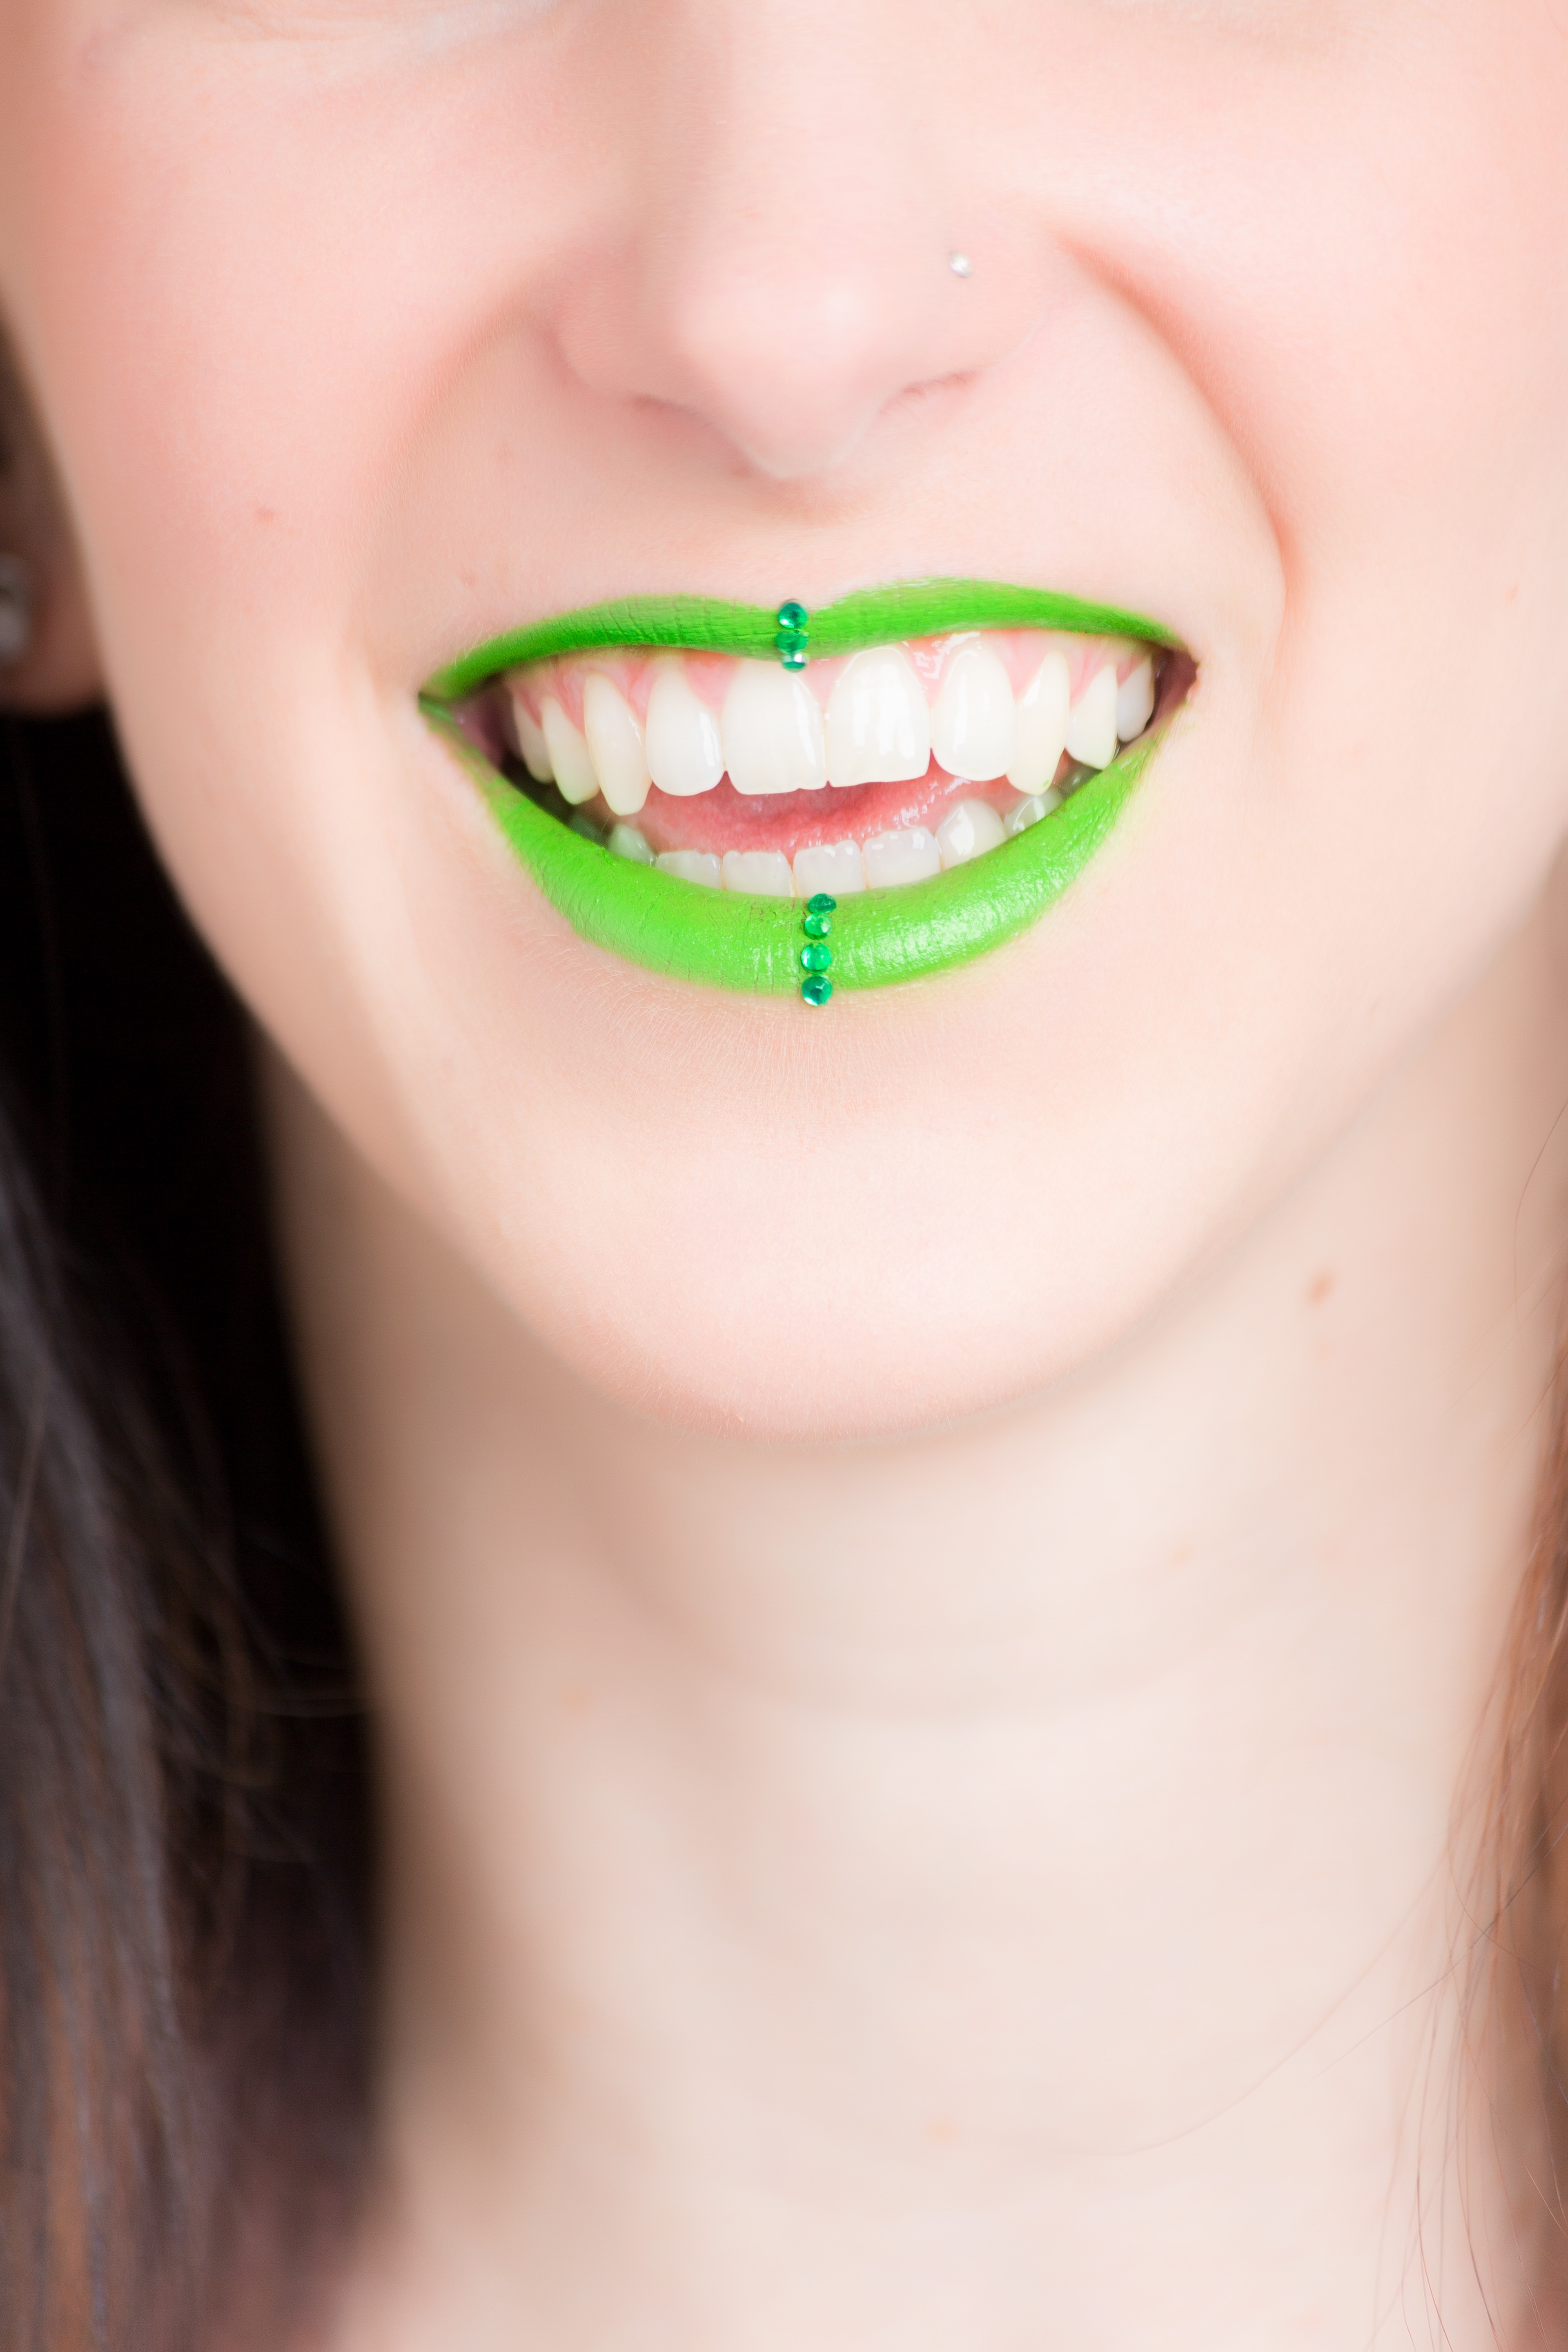 Woman Smiling With Green Lipstick, Adult, Makeup, Woman, Teeth, HQ Photo